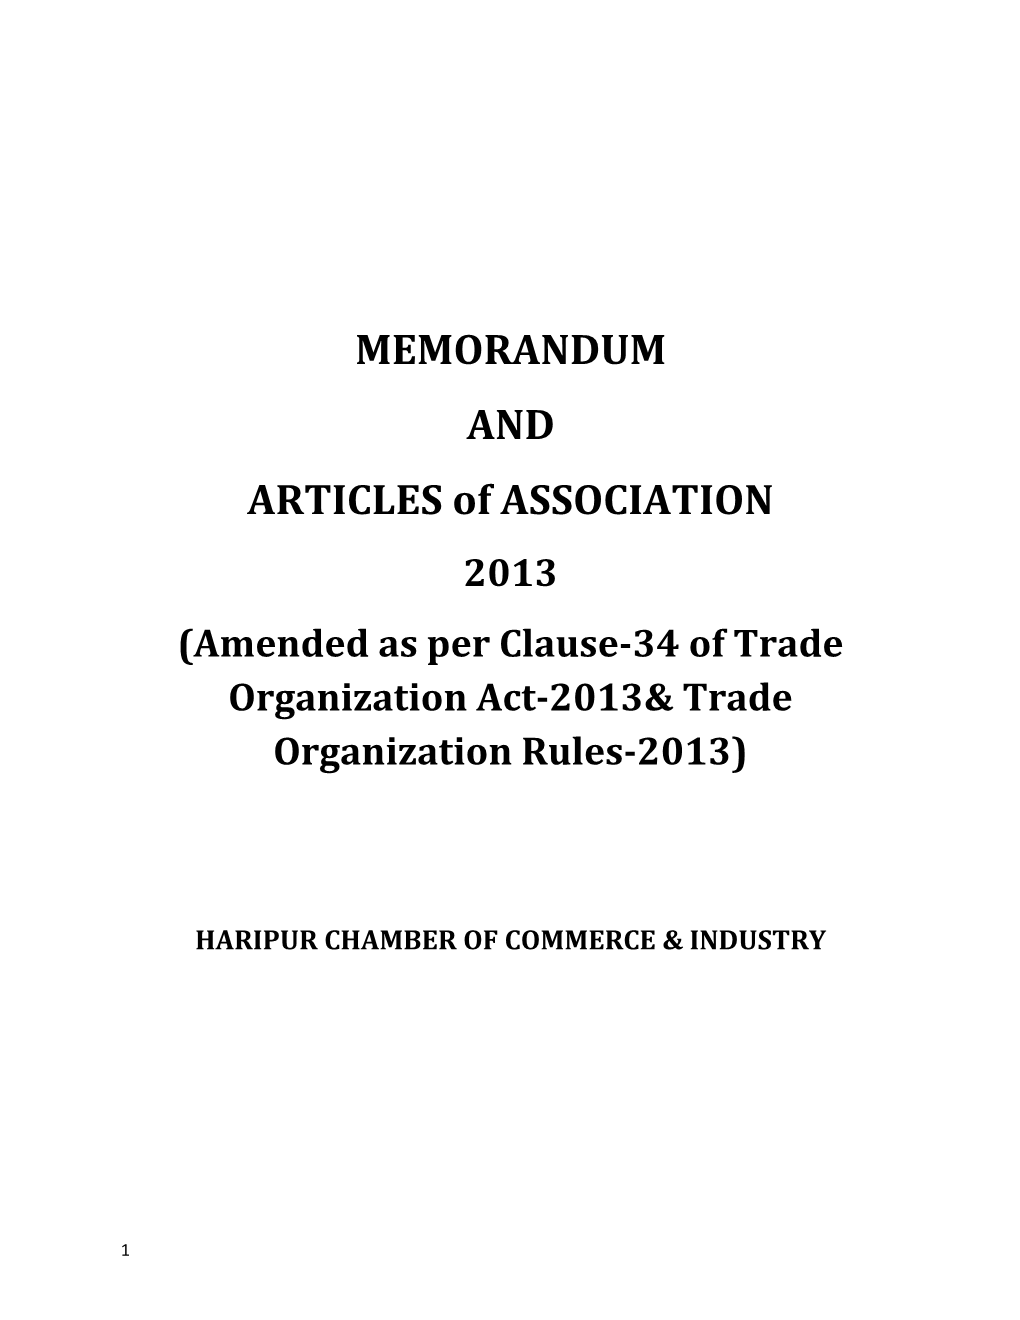 Amended As Per Clause-34 of Trade Organization Act-2013& Trade Organization Rules-2013